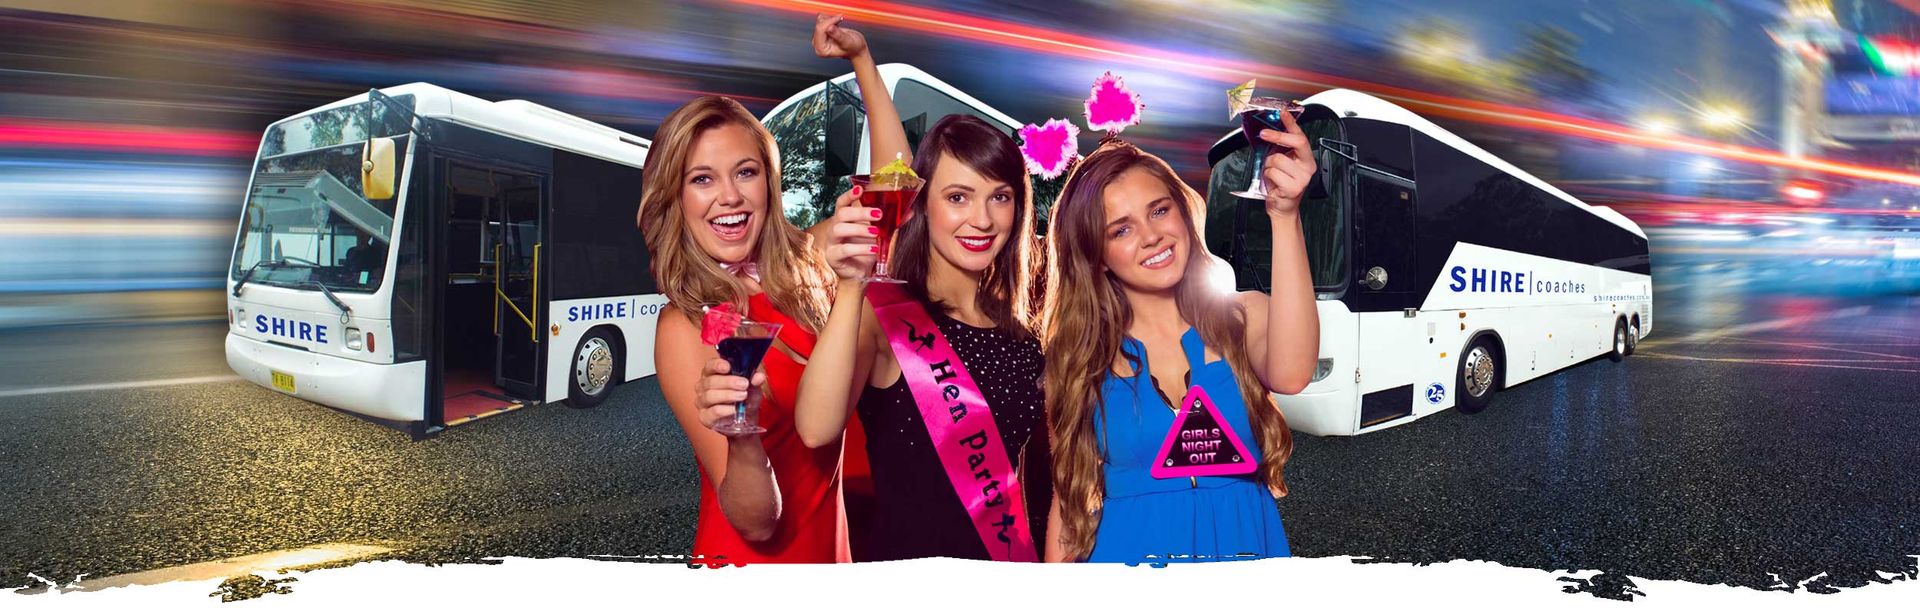 bucks and hens parties bus charters image